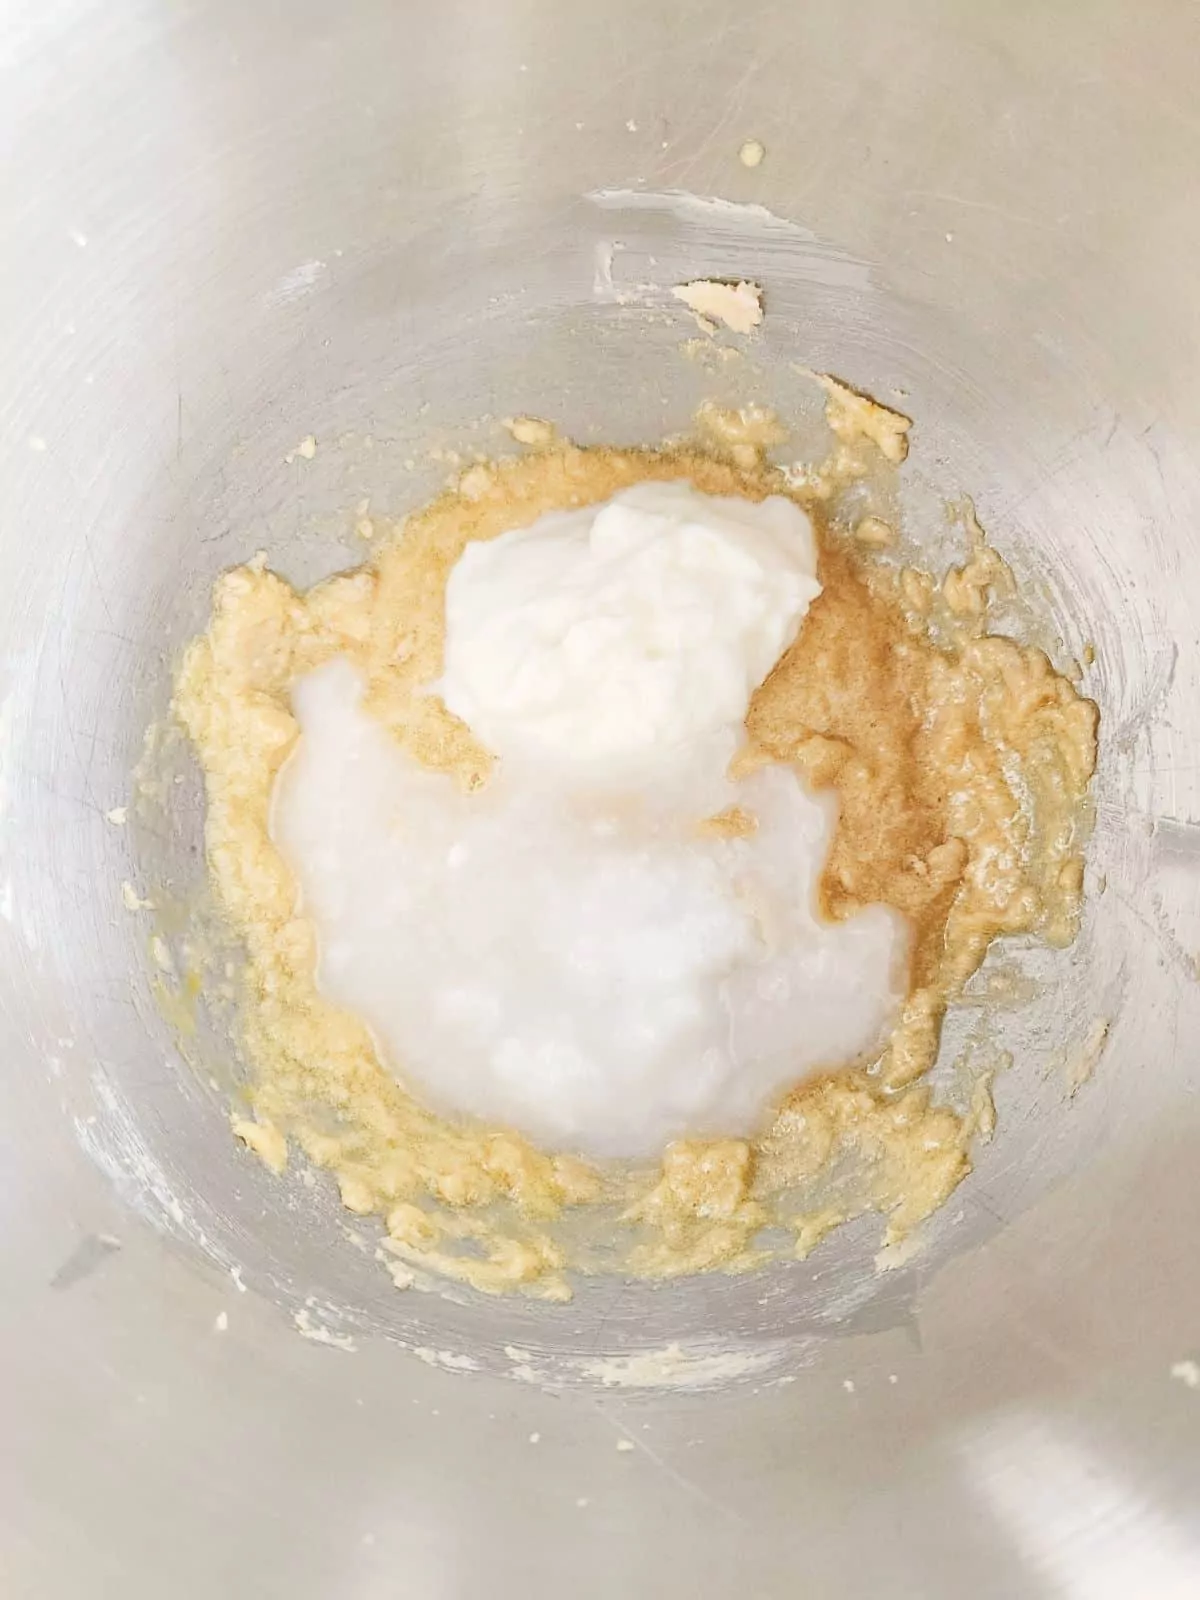 Add Greek yogurt with melted coconut oil to butter and sugar mixture.